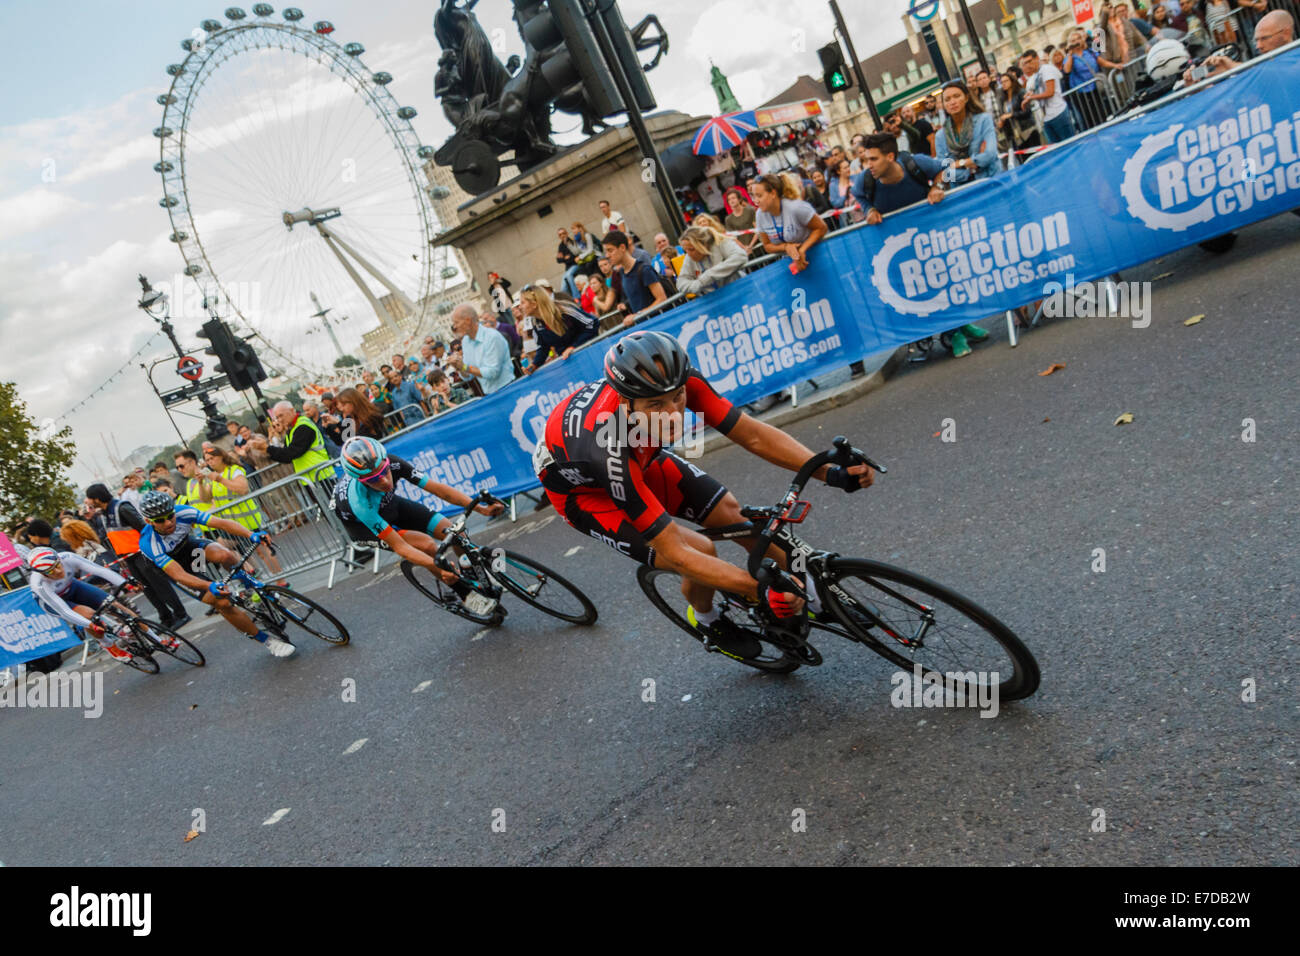 London, UK. 14th September 2014. British rider Stephen Cummings of team BMC leads a breakaway group of riders during the final stage of the Tour of Britain cycle race in central London. Stock Photo